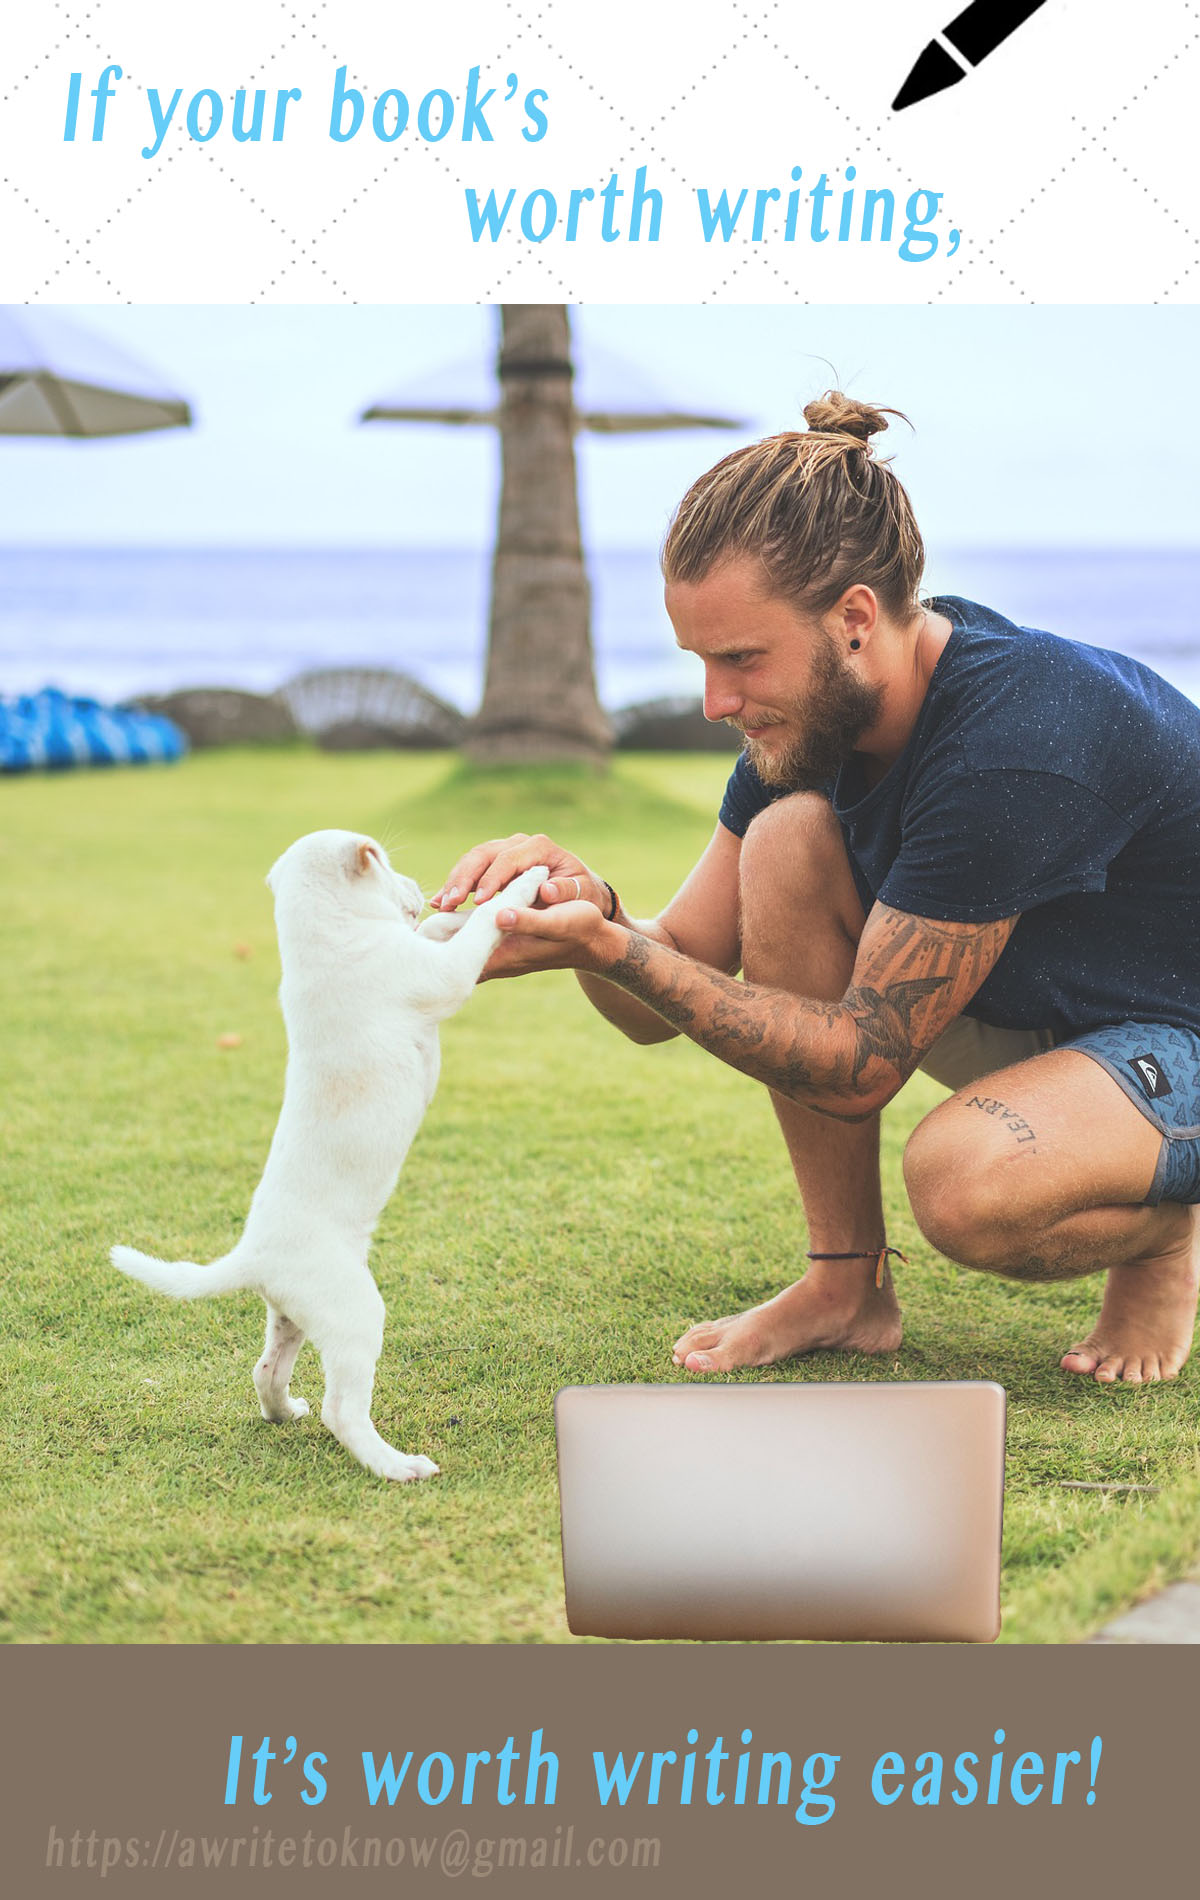 A young man plays with his white shih tzu puppy on the grass at the beach, taking a break from writing on his laptop. The words say, “If it’s worth writing, it’s worth writing easier.”